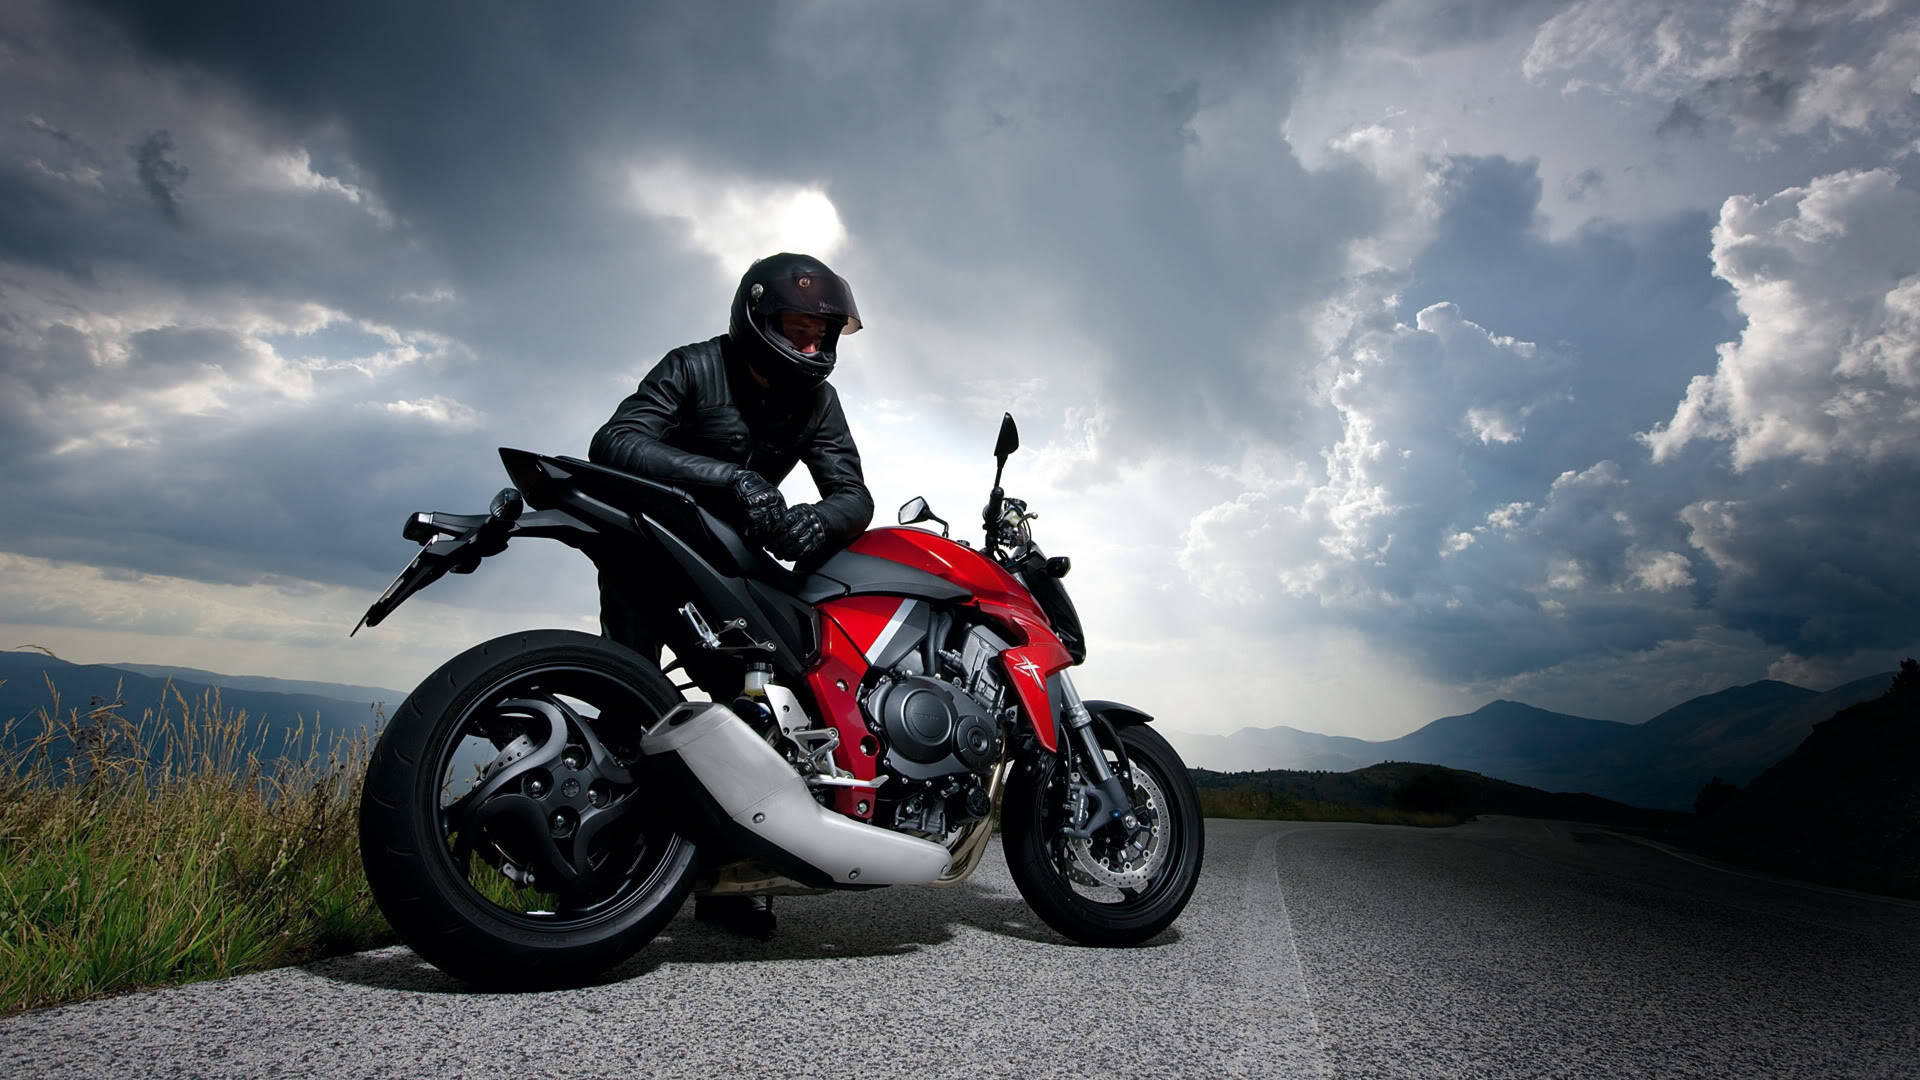 Hd Red Motorcycle Outdoors Wallpaper